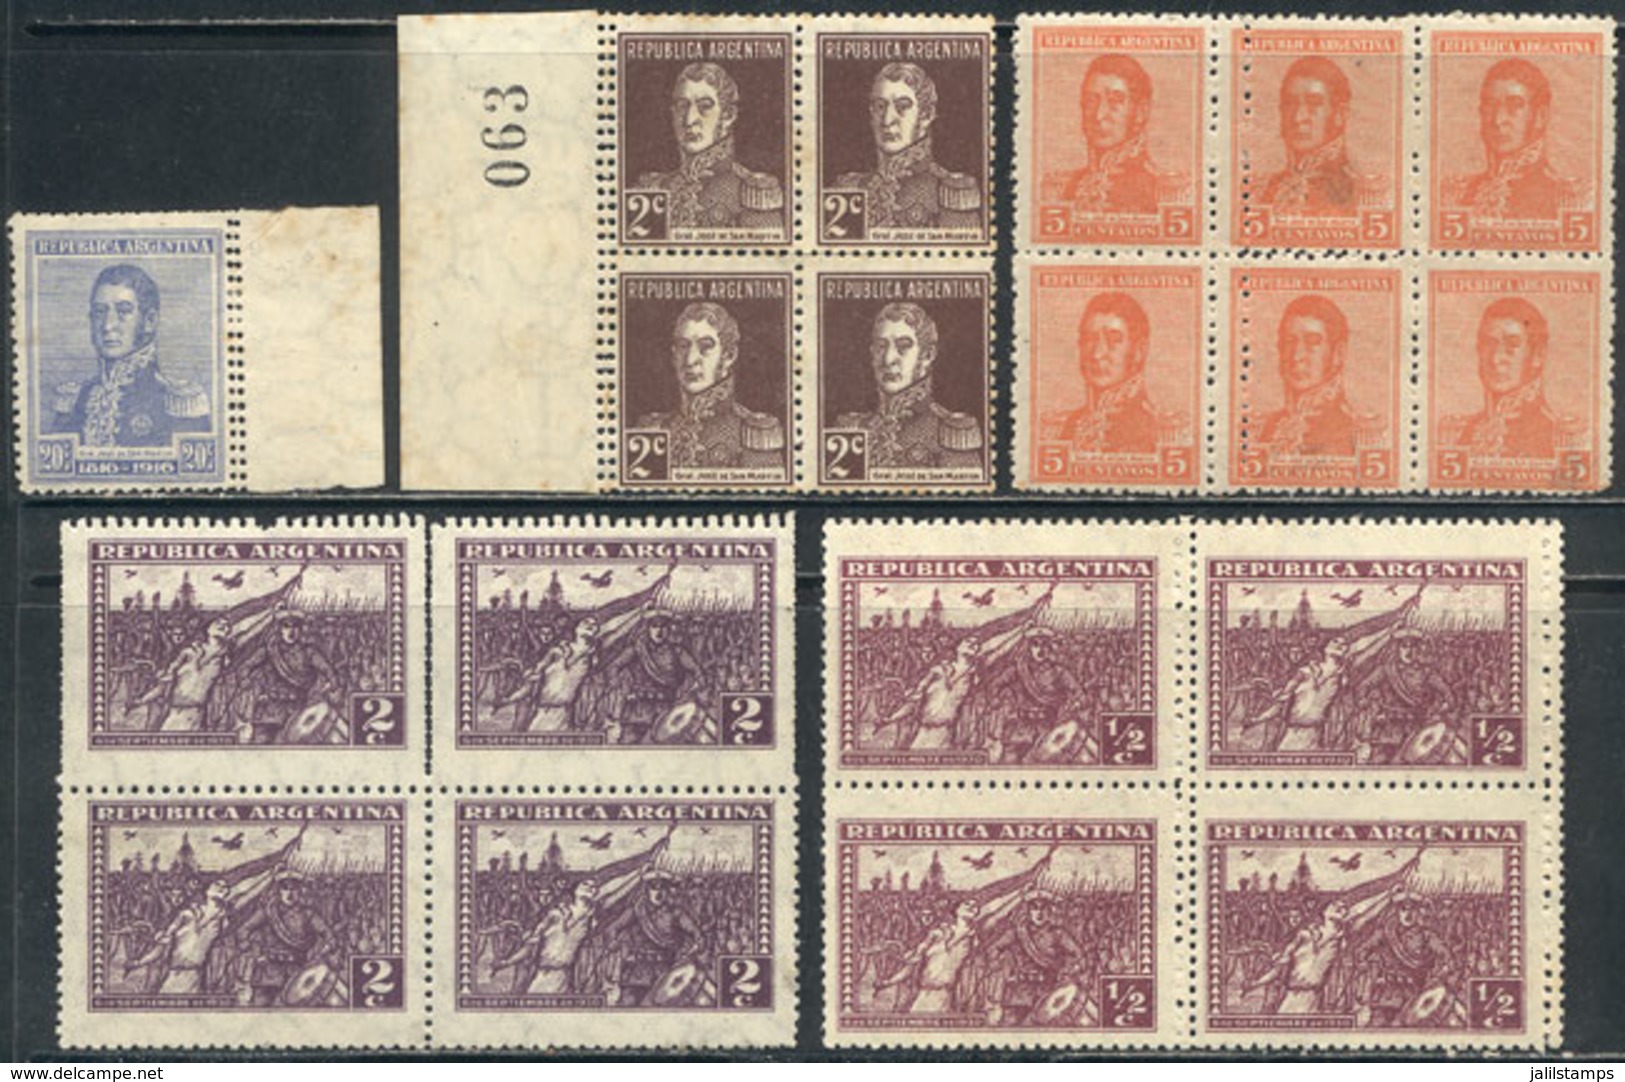 ARGENTINA: PERFORATION VARITIES: 5 Stamps With DOUBLE PERFORATIONS, Most In Blocks Of 4 Or Larger, Some With Light Stain - Colecciones & Series